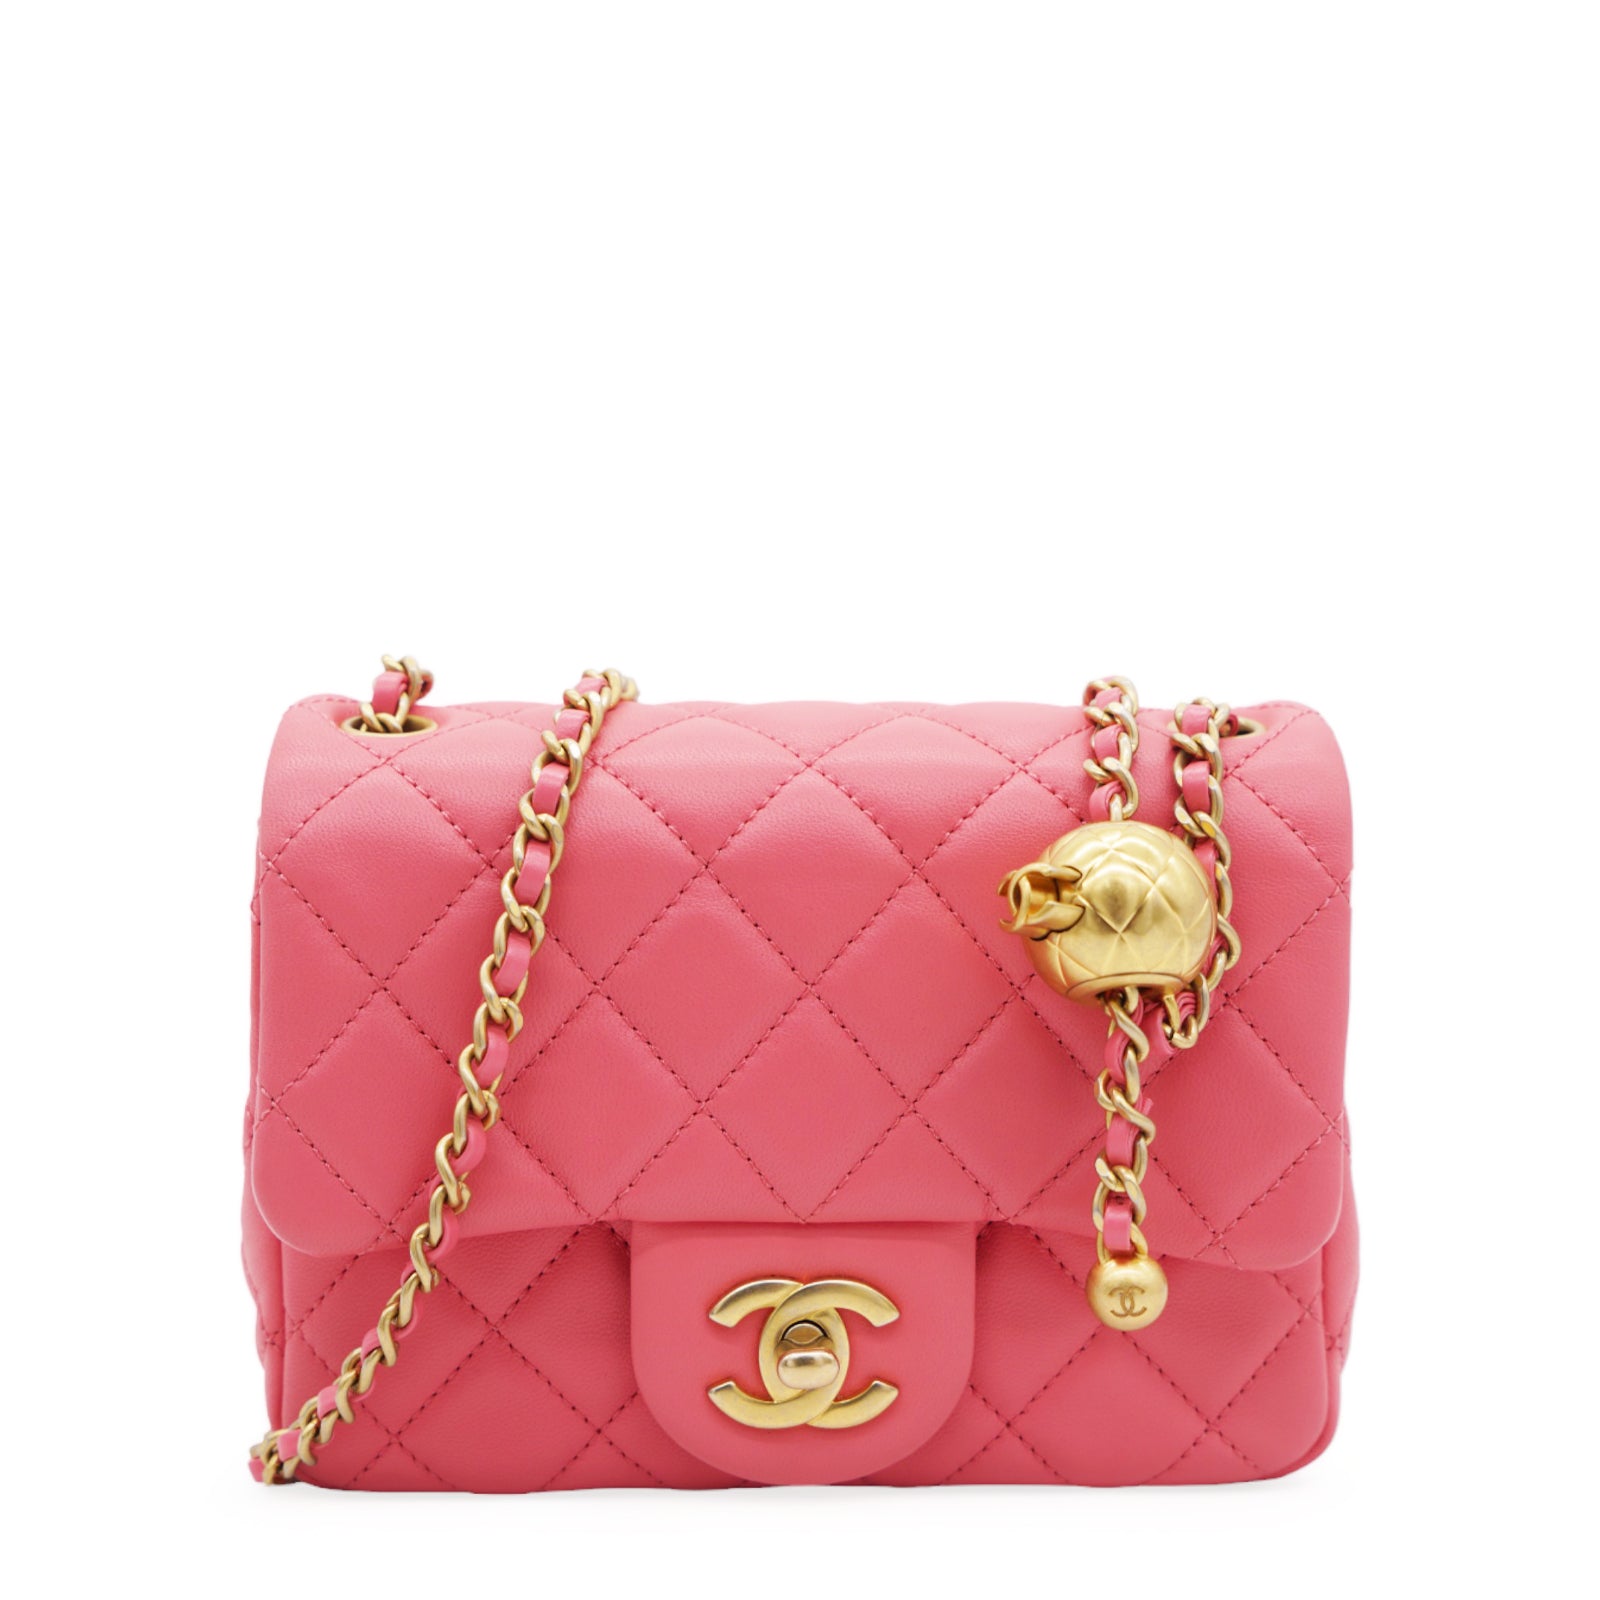 real chanel purse